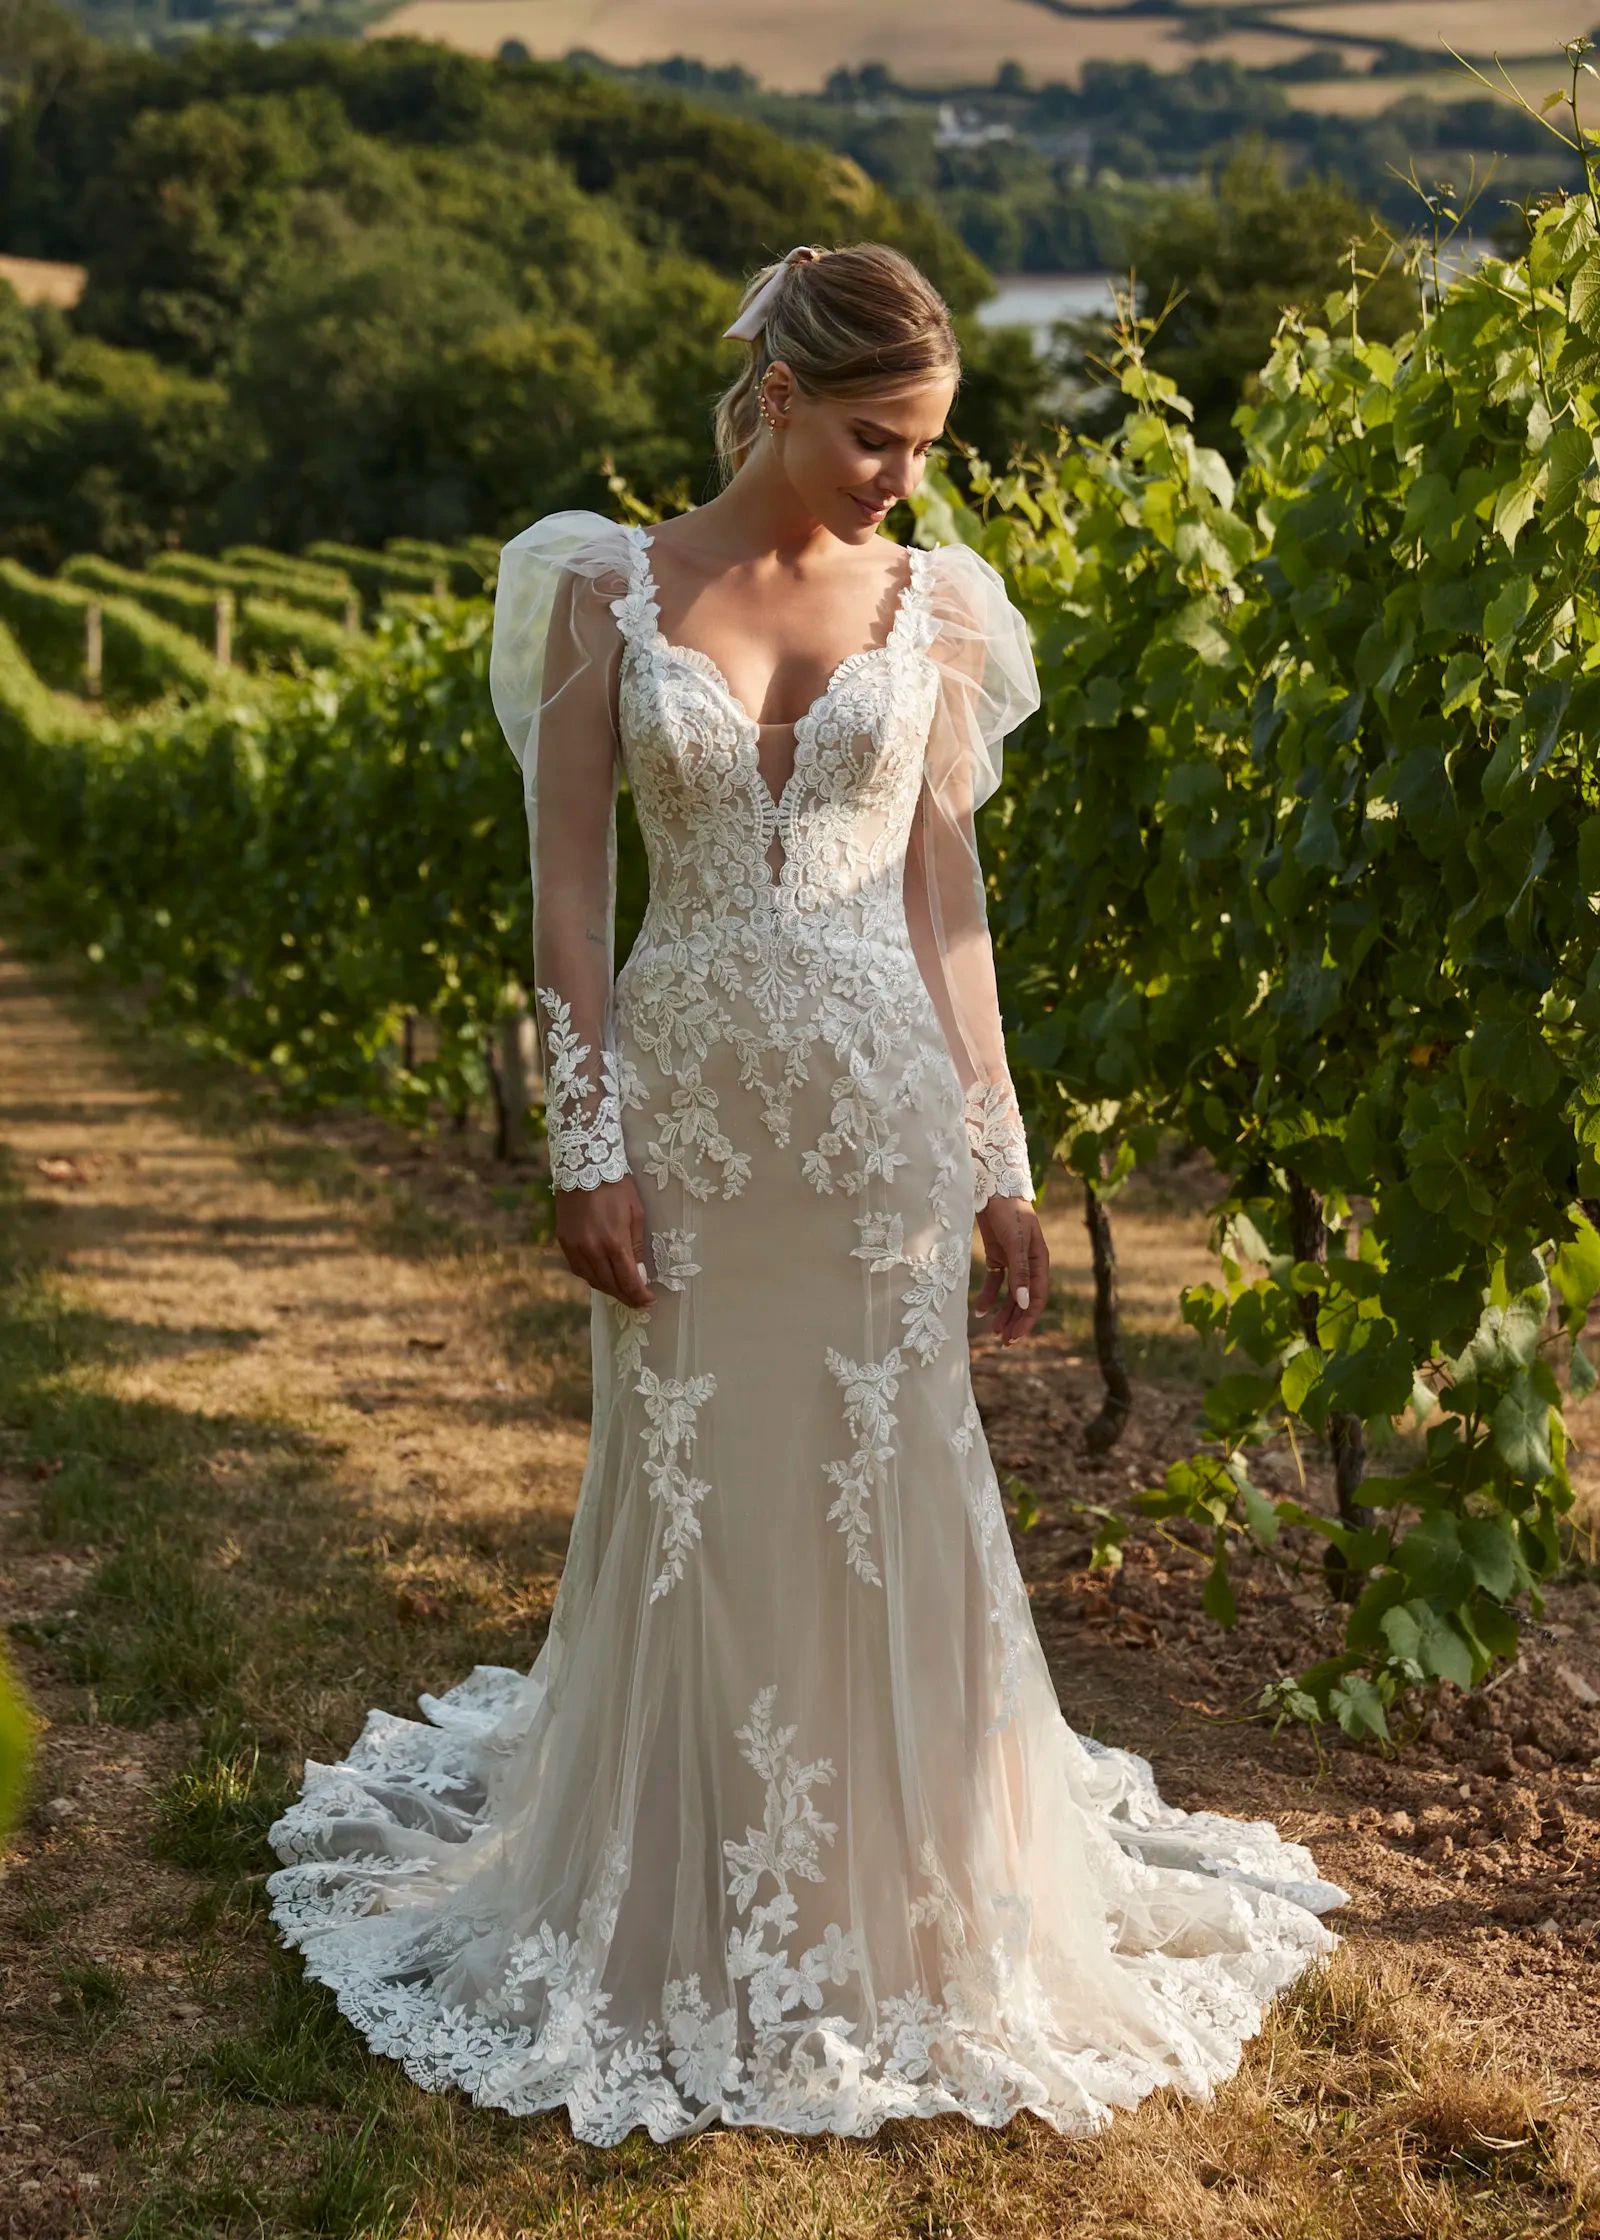 JW220930
A jaw dropping lace fit and flare dress with a plunging neckline and illusion sleeves. Show